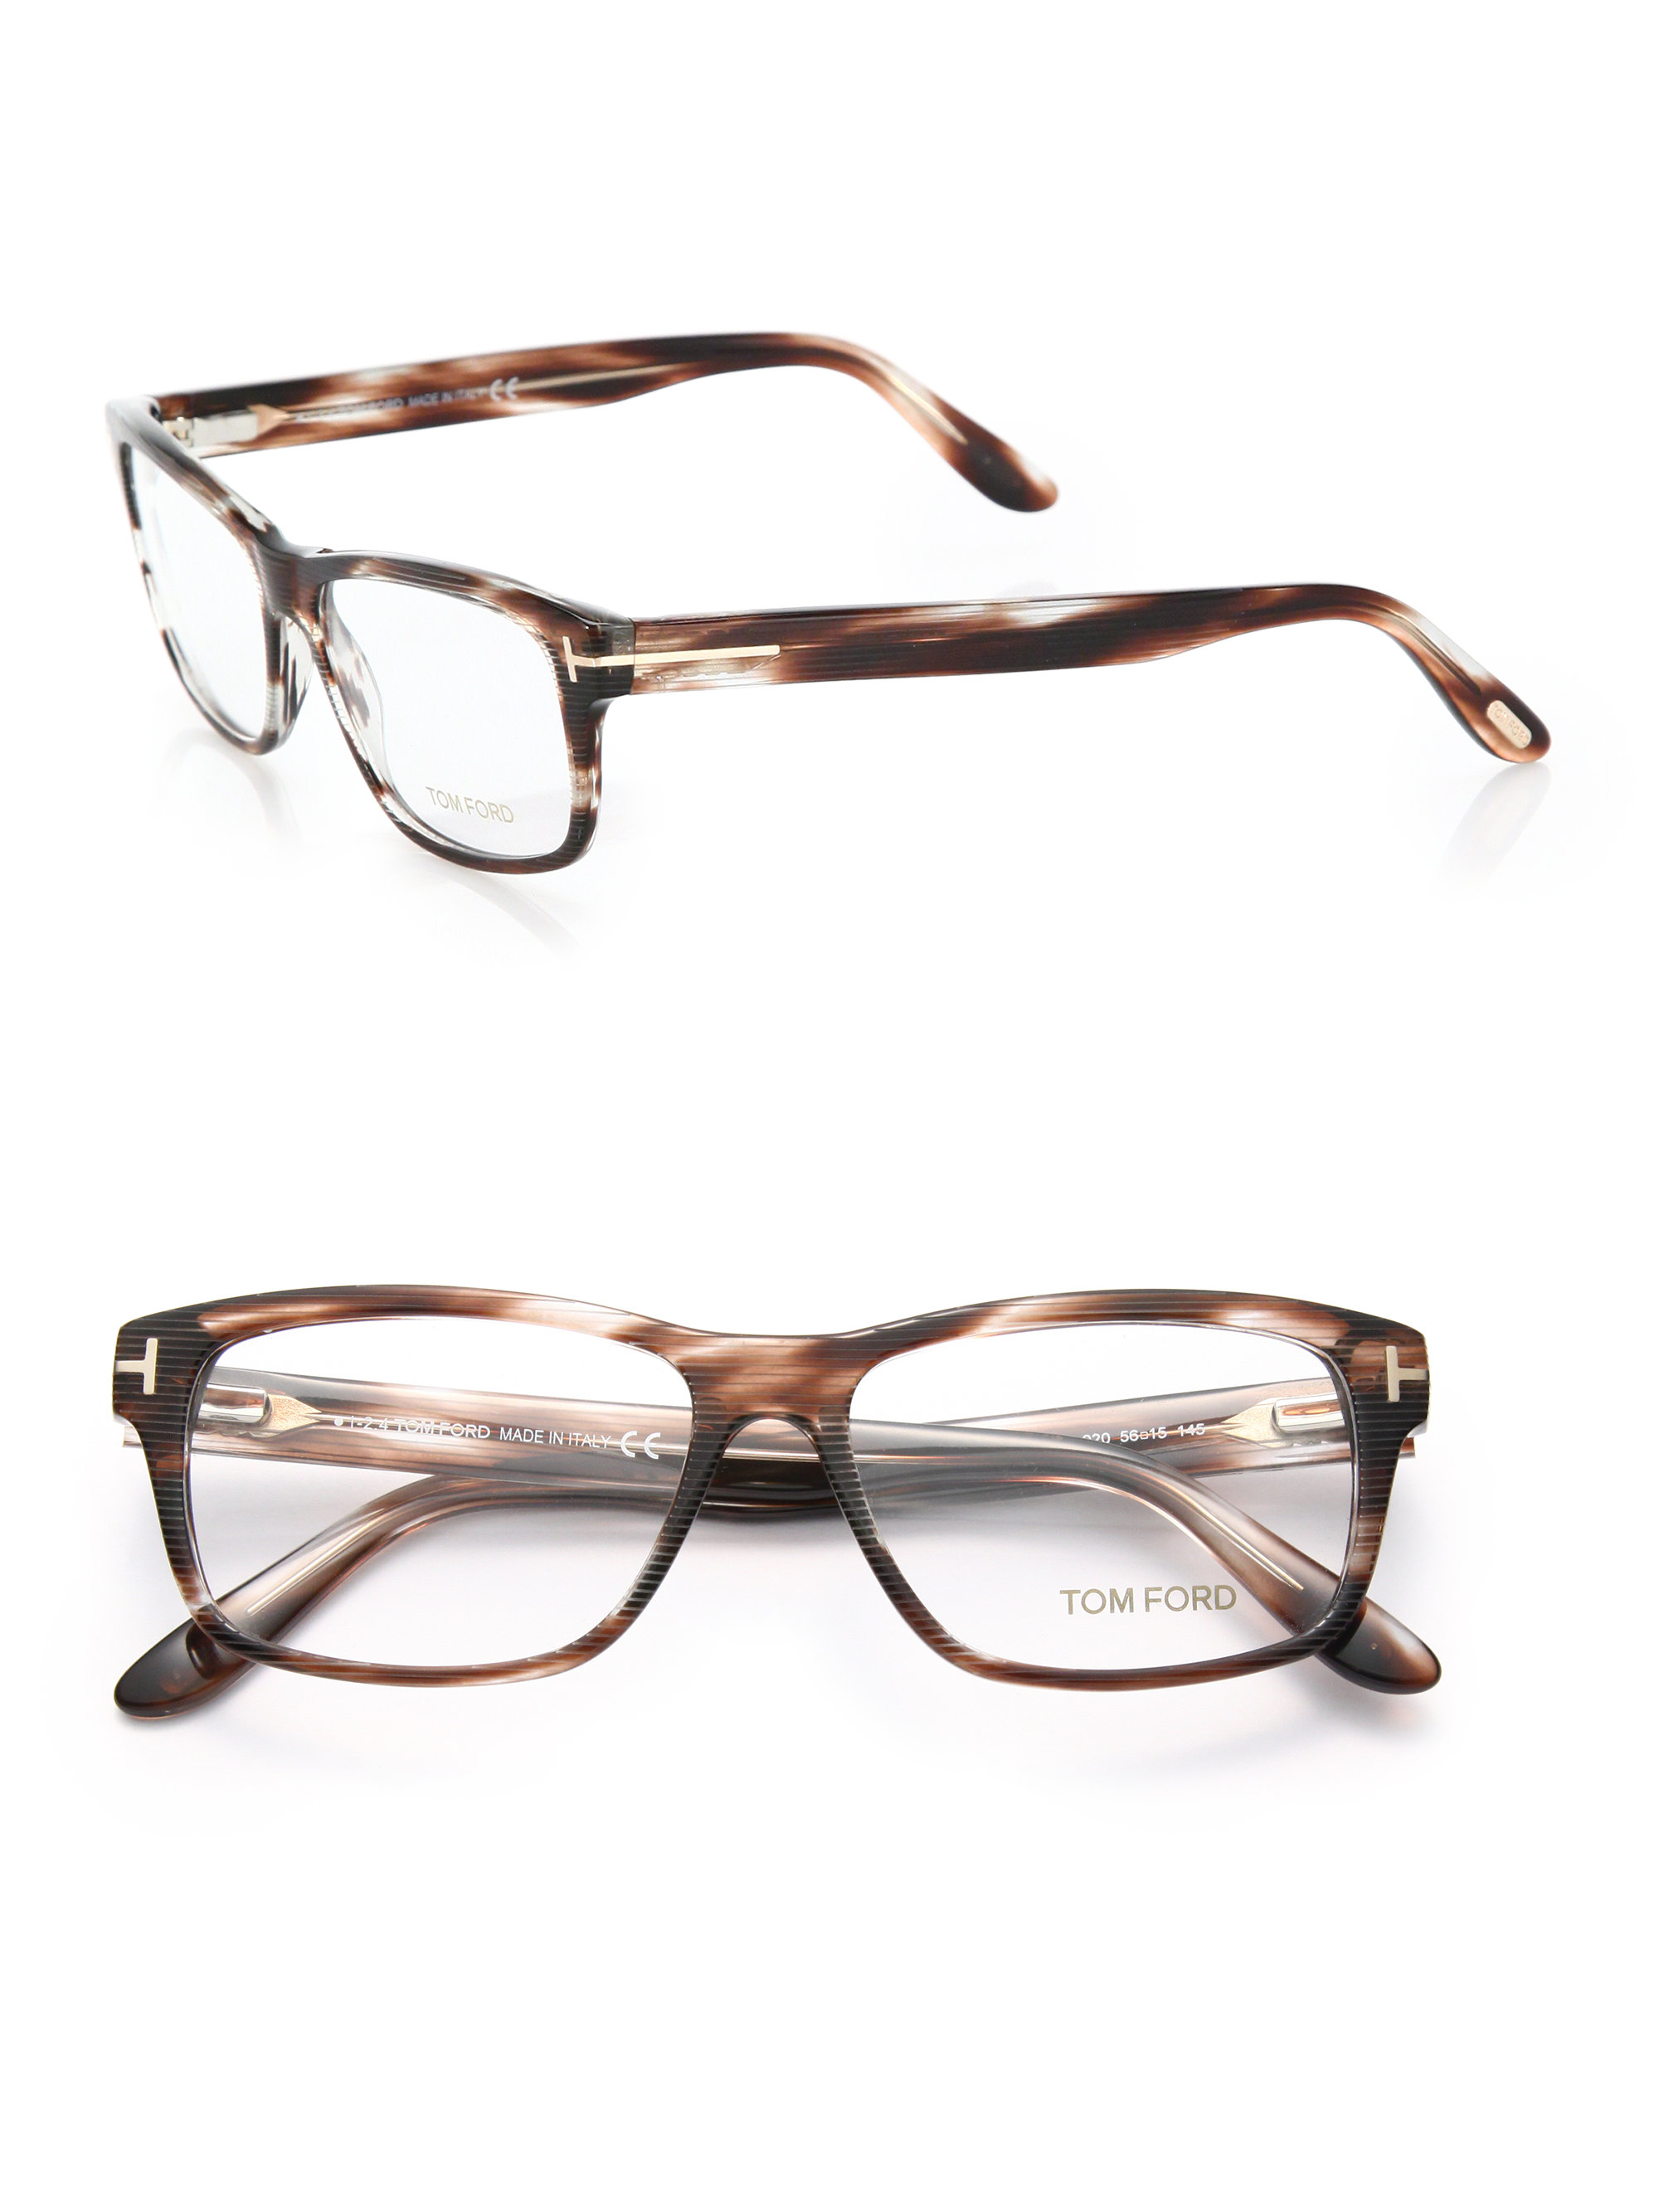 Tom ford 56mm Square Acetate Optical Glasses in Brown | Lyst